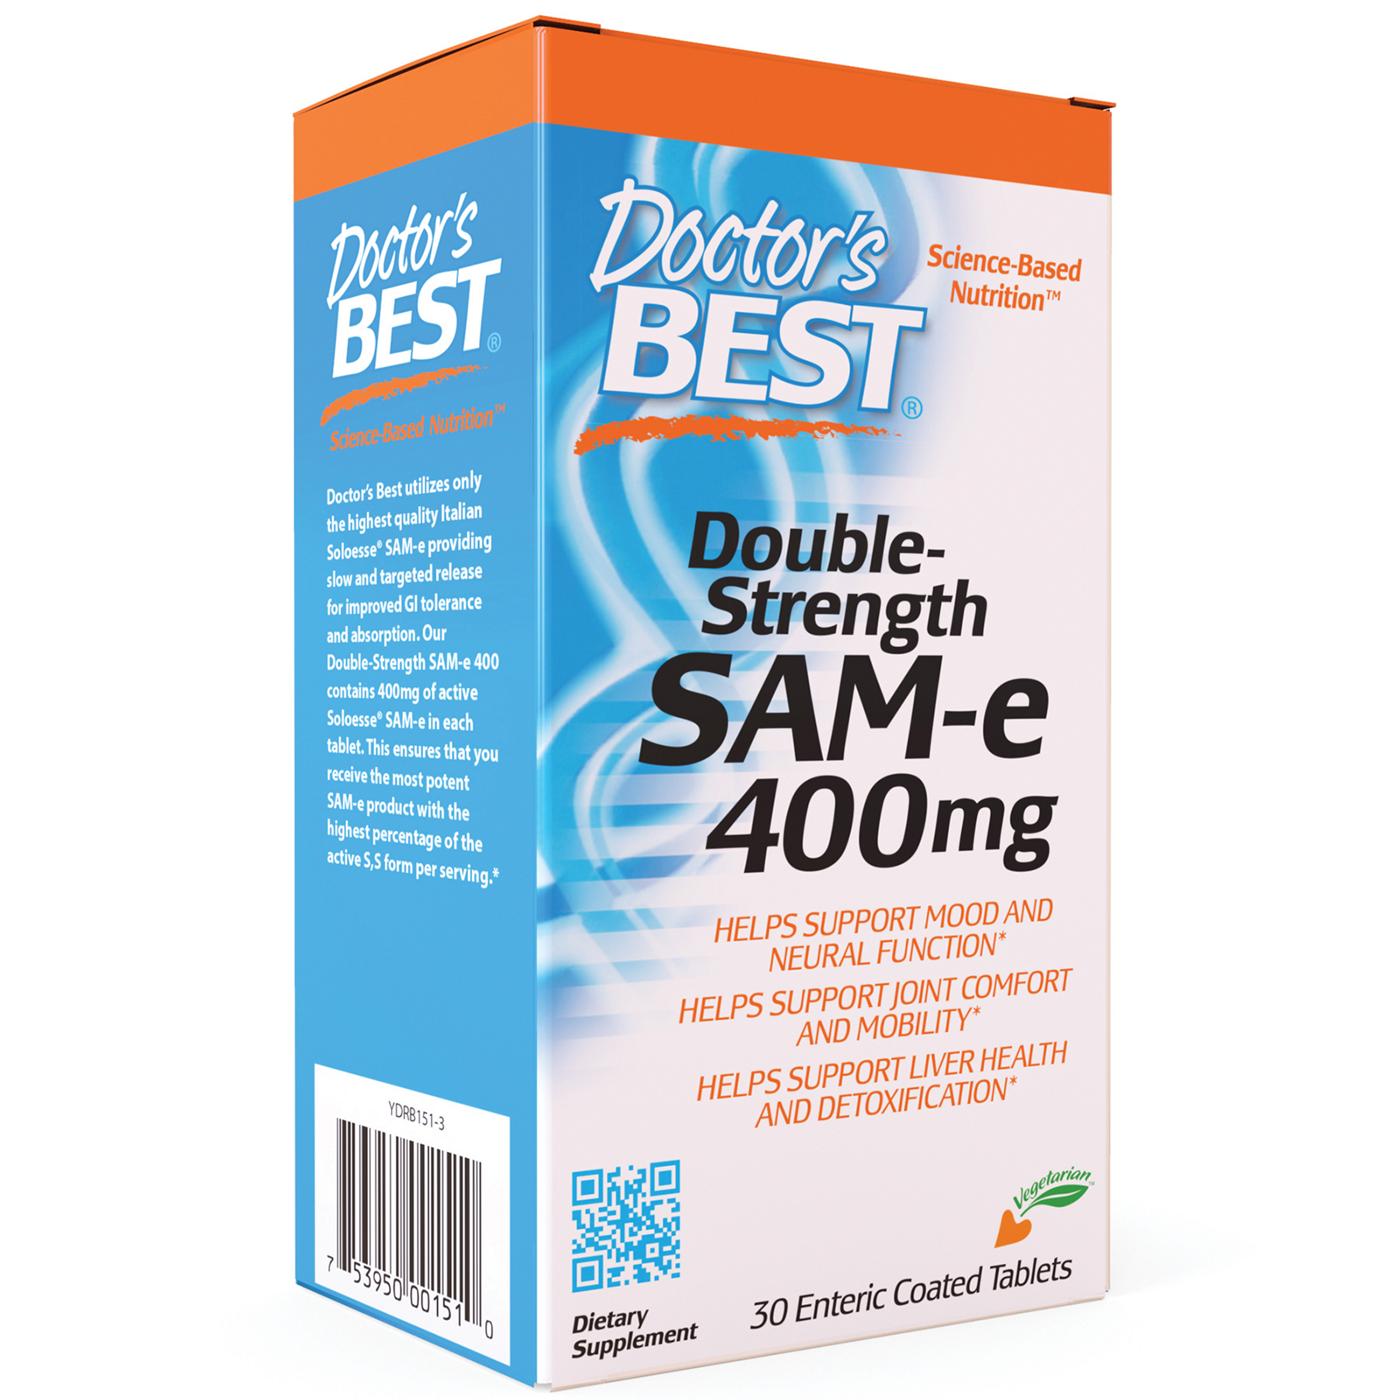 Doctor's Best Double Strength Sam-E 400 mg Tablets; image 1 of 2